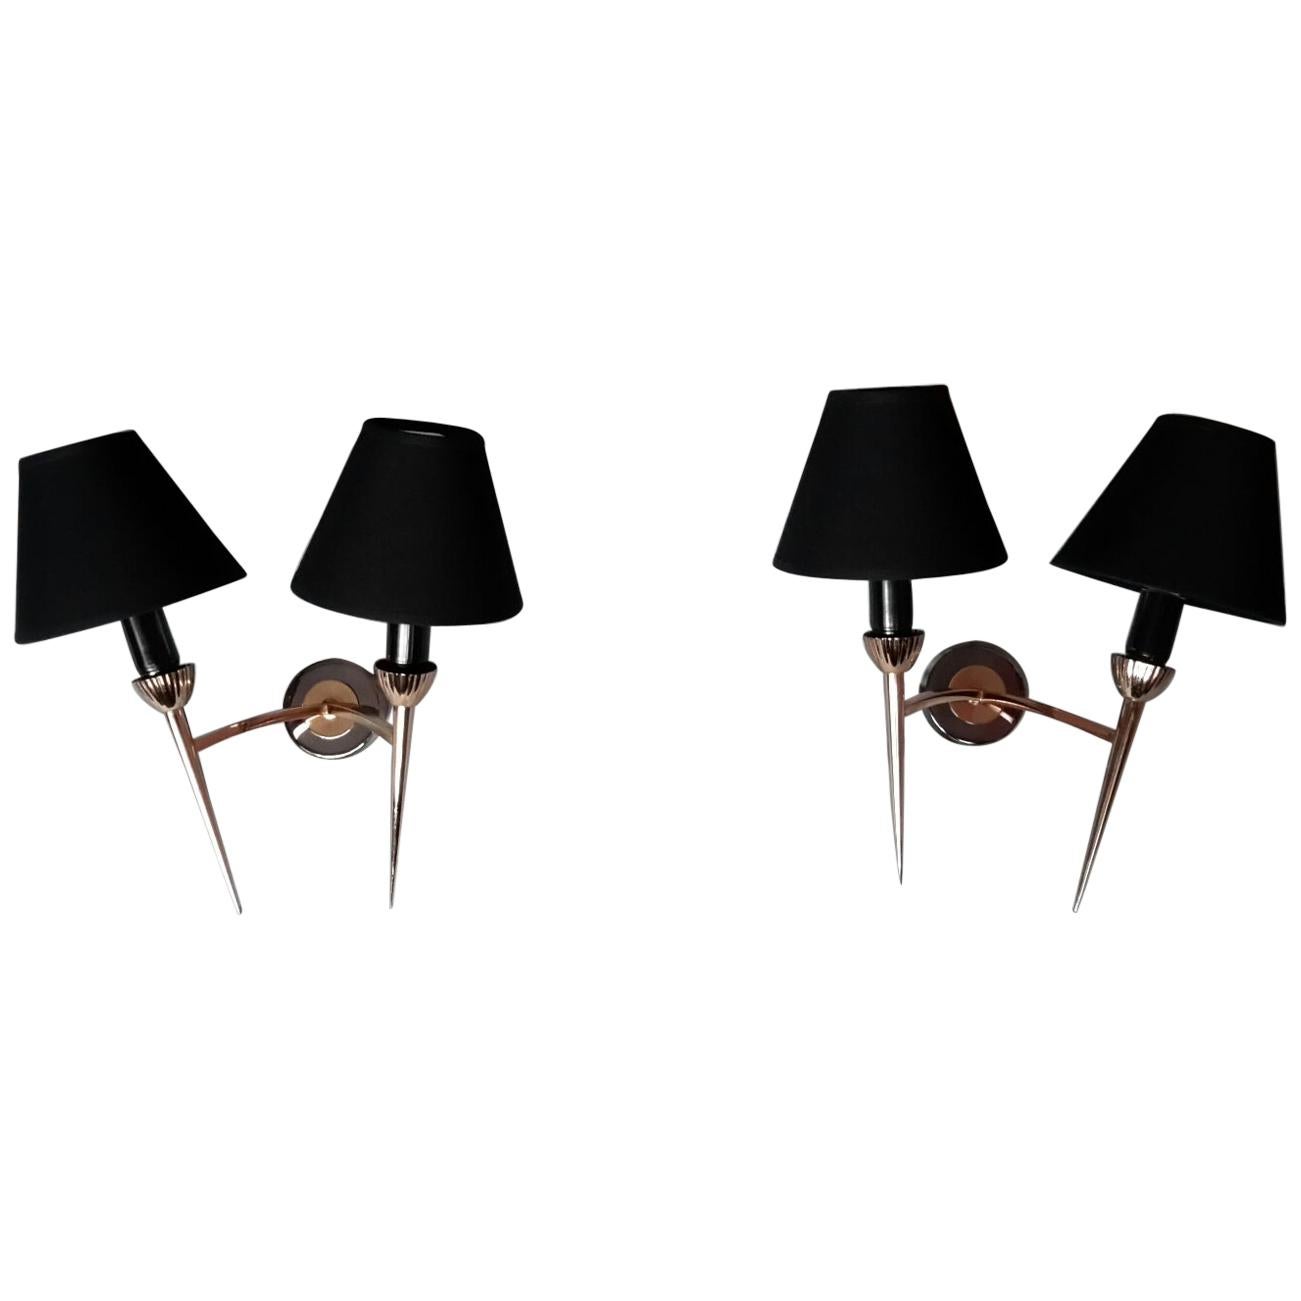 Pair of Neoclassical Sconces by Maison Lunel, France, 1950 For Sale